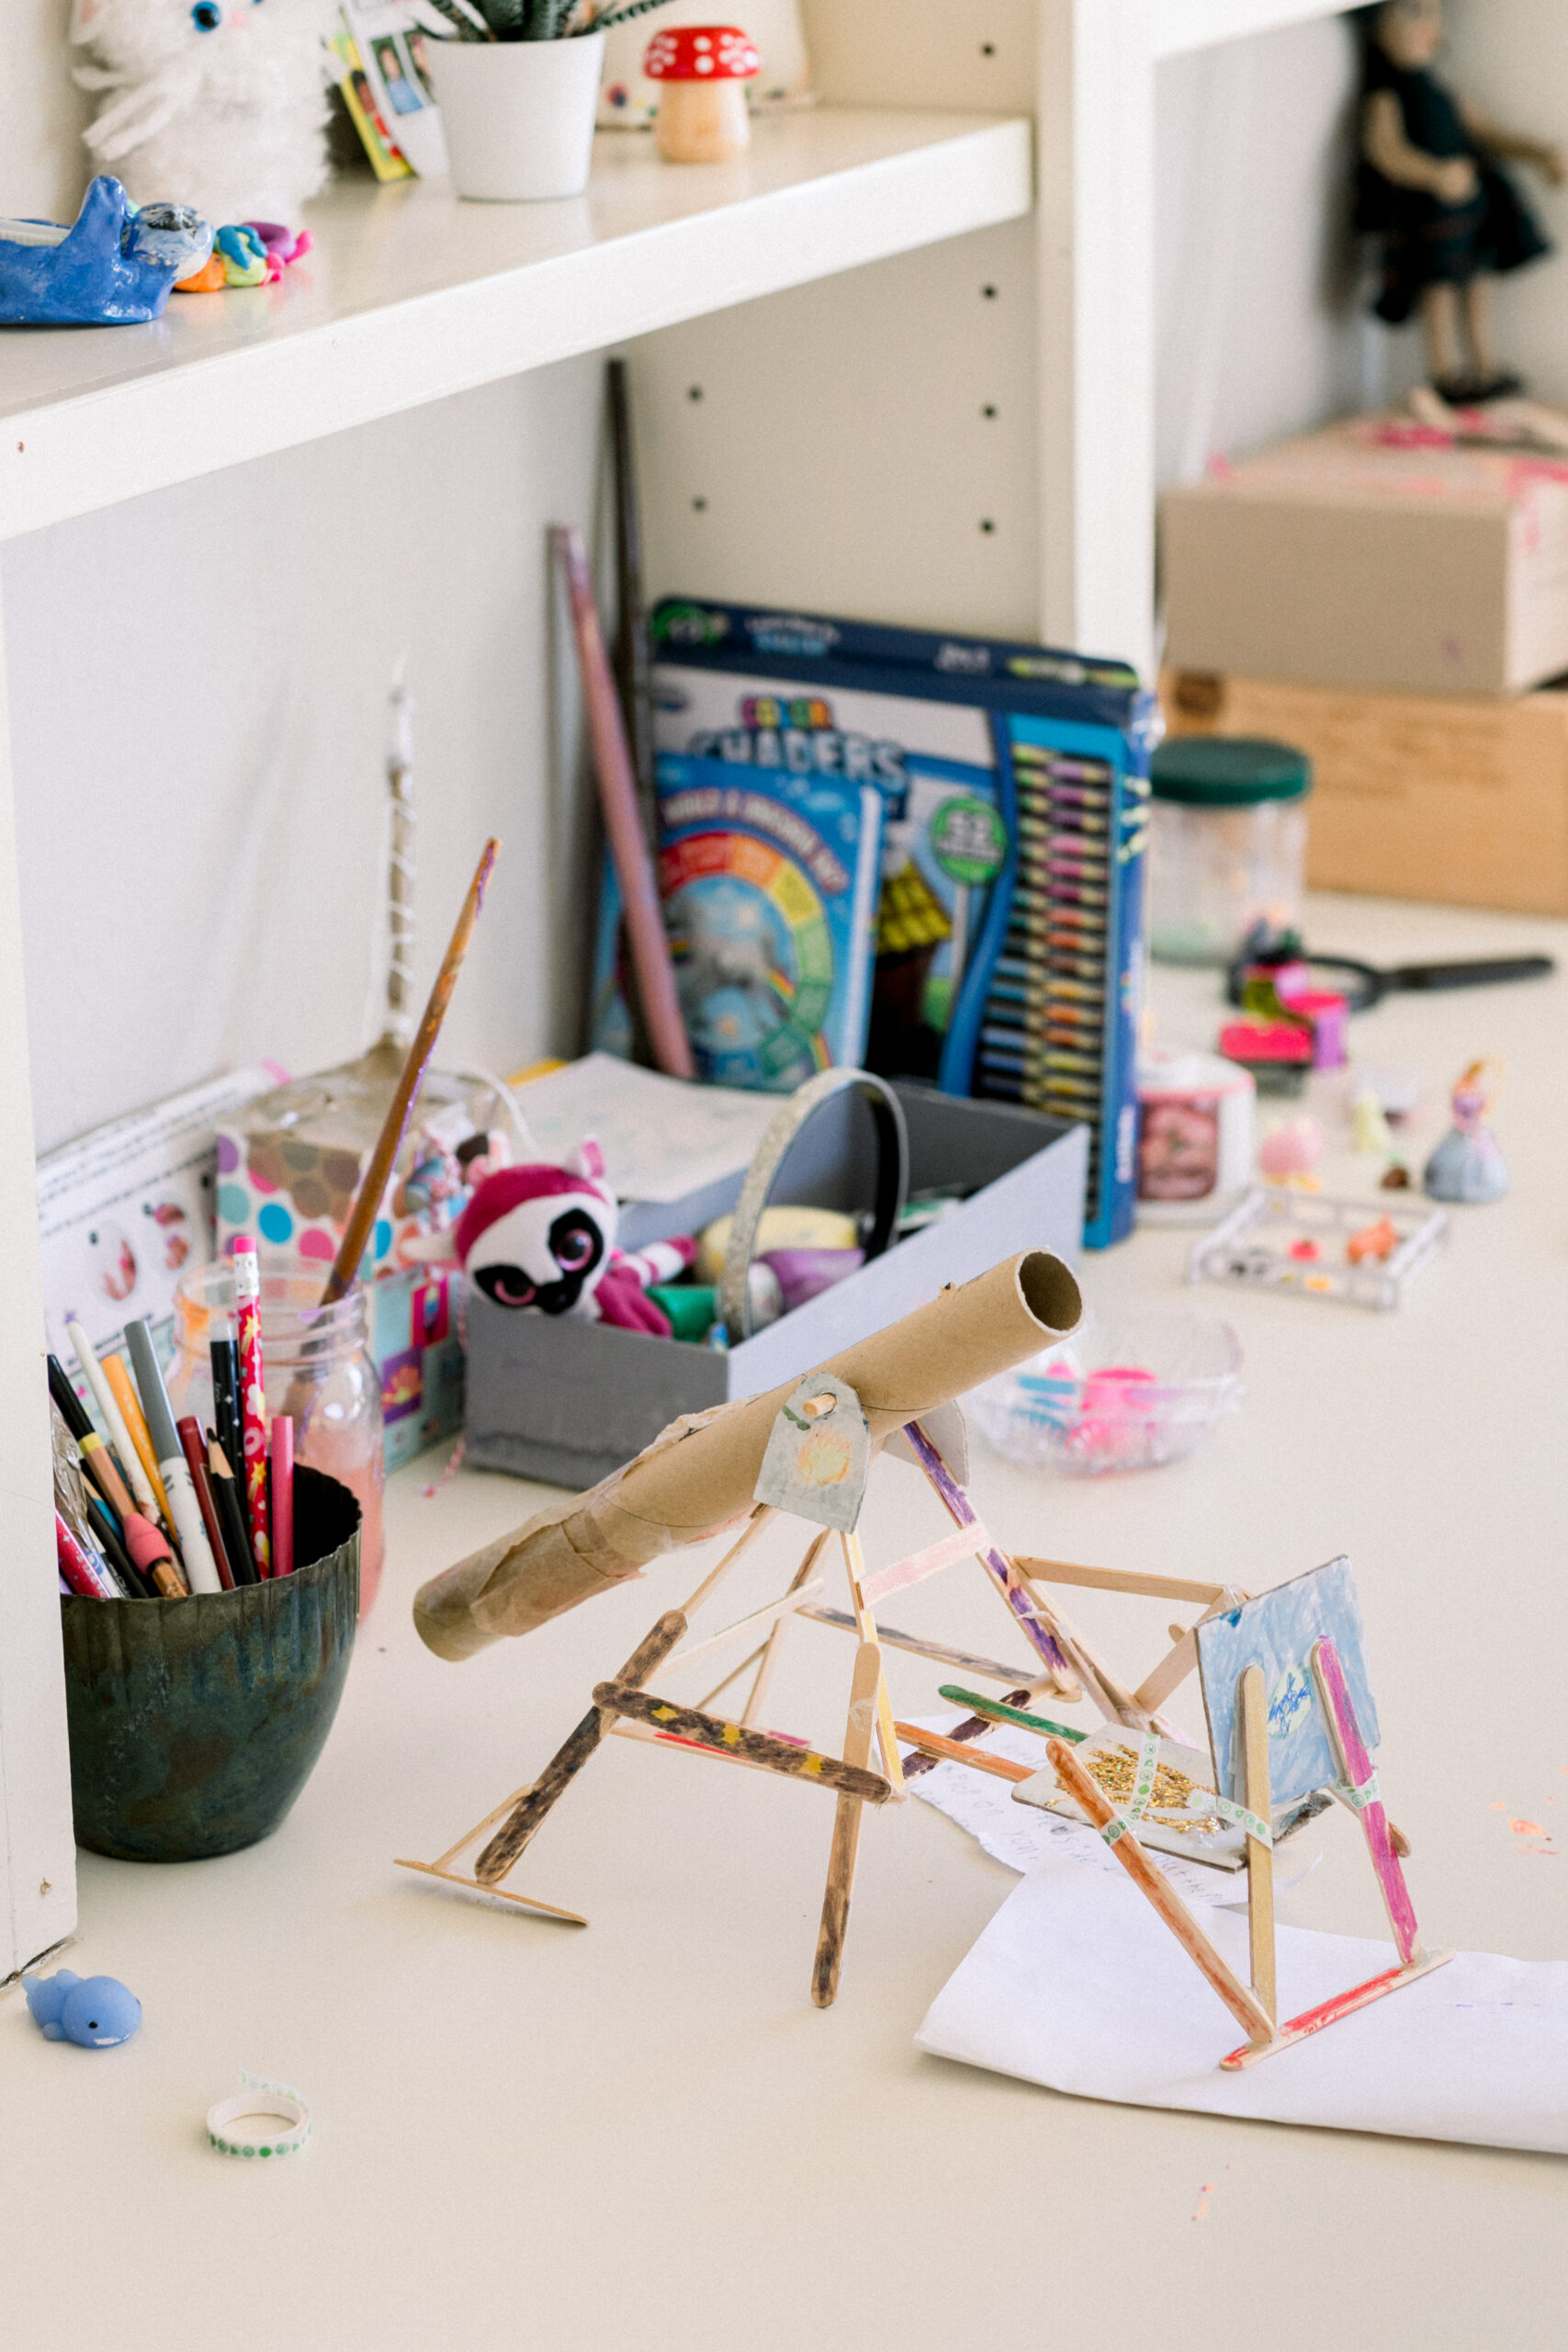 Art projects in Mica's room. (Eileen Roche/for Sonoma Magazine)